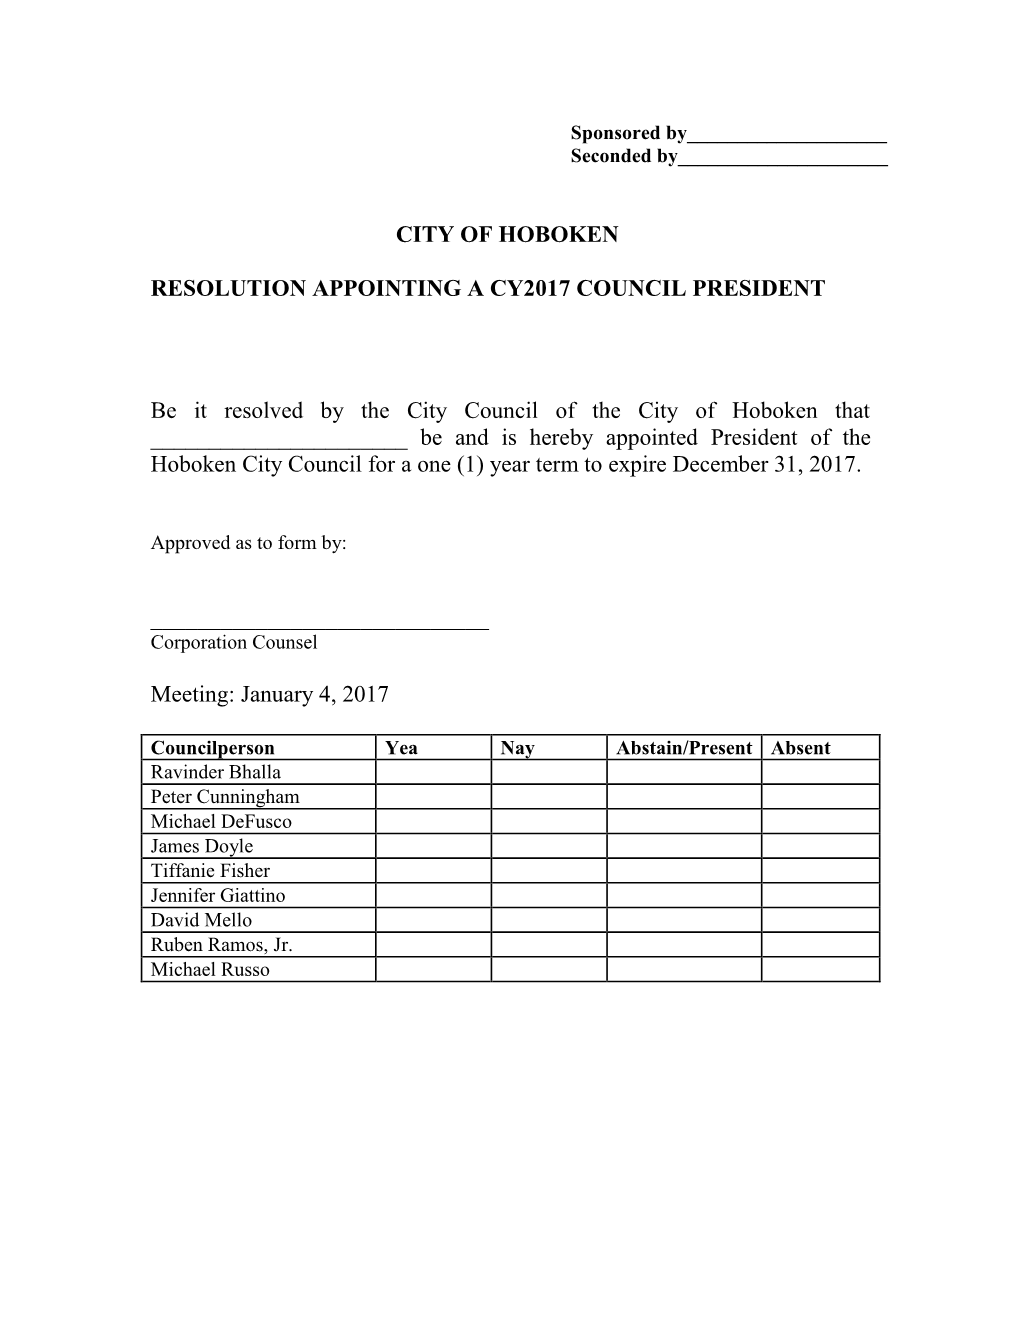 CITY of HOBOKEN RESOLUTION APPOINTING a CY2017 COUNCIL PRESIDENT Be It Resolved by the City Council of the City of Hoboken That